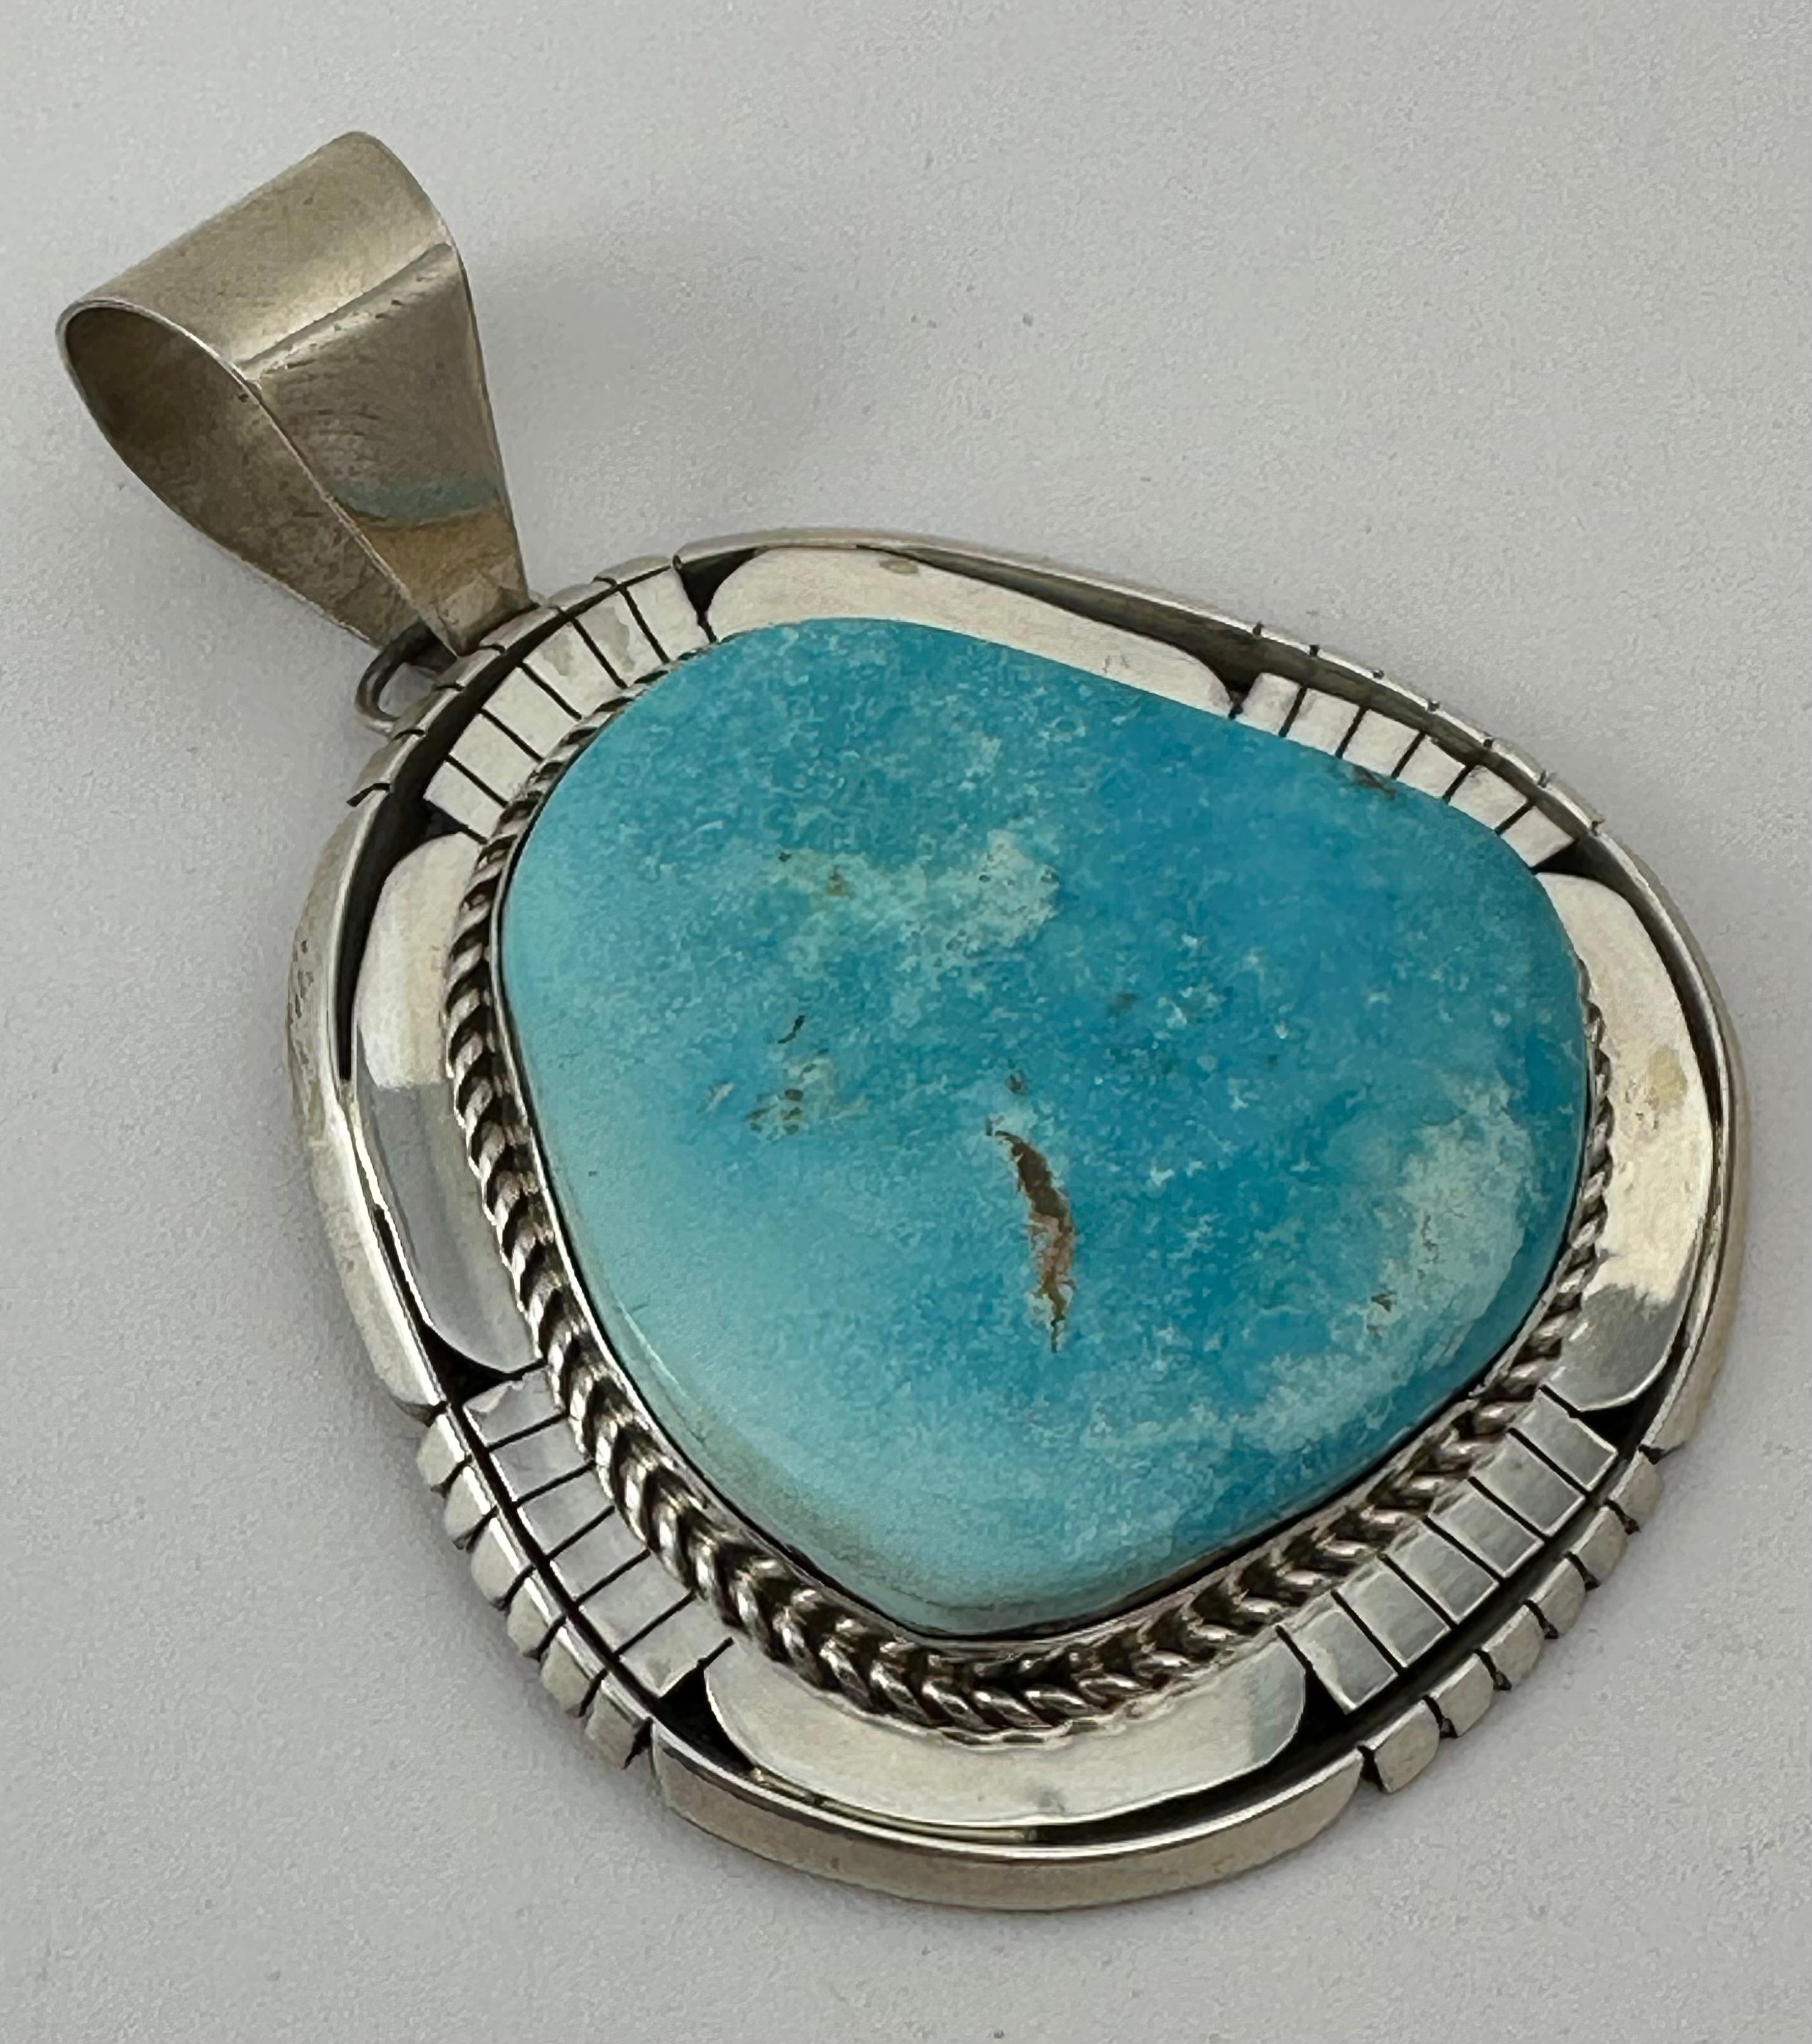 Sterling Silver .925 Sleeping Beauty Turquoise Pendant  by Navajo Artist Betta Lee
Measures approximately 2